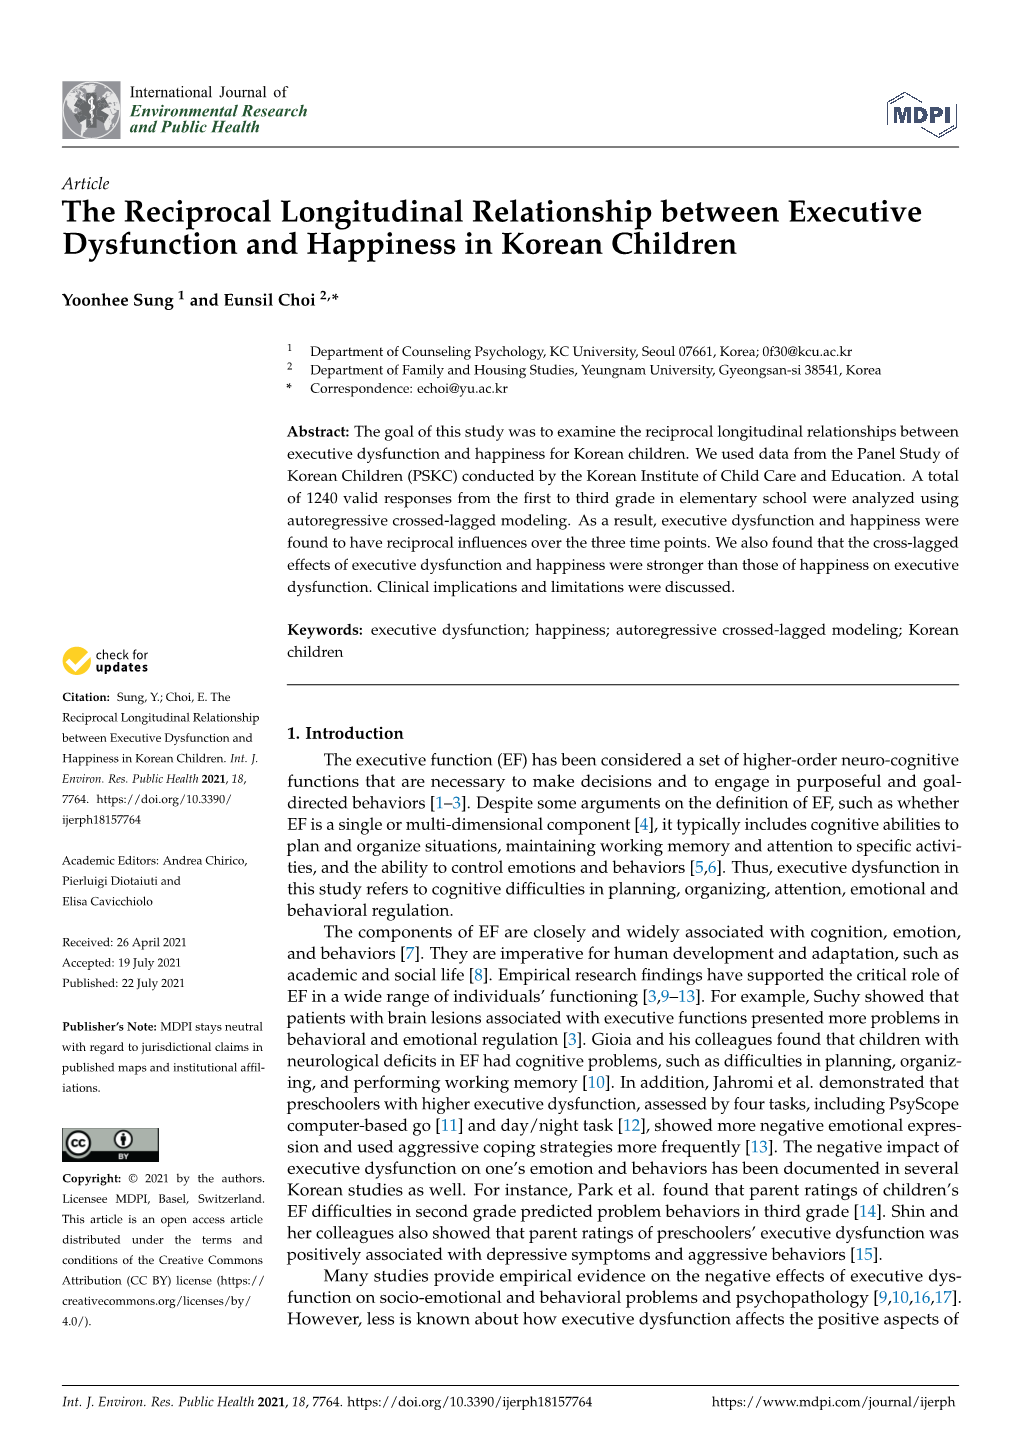 The Reciprocal Longitudinal Relationship Between Executive Dysfunction and Happiness in Korean Children